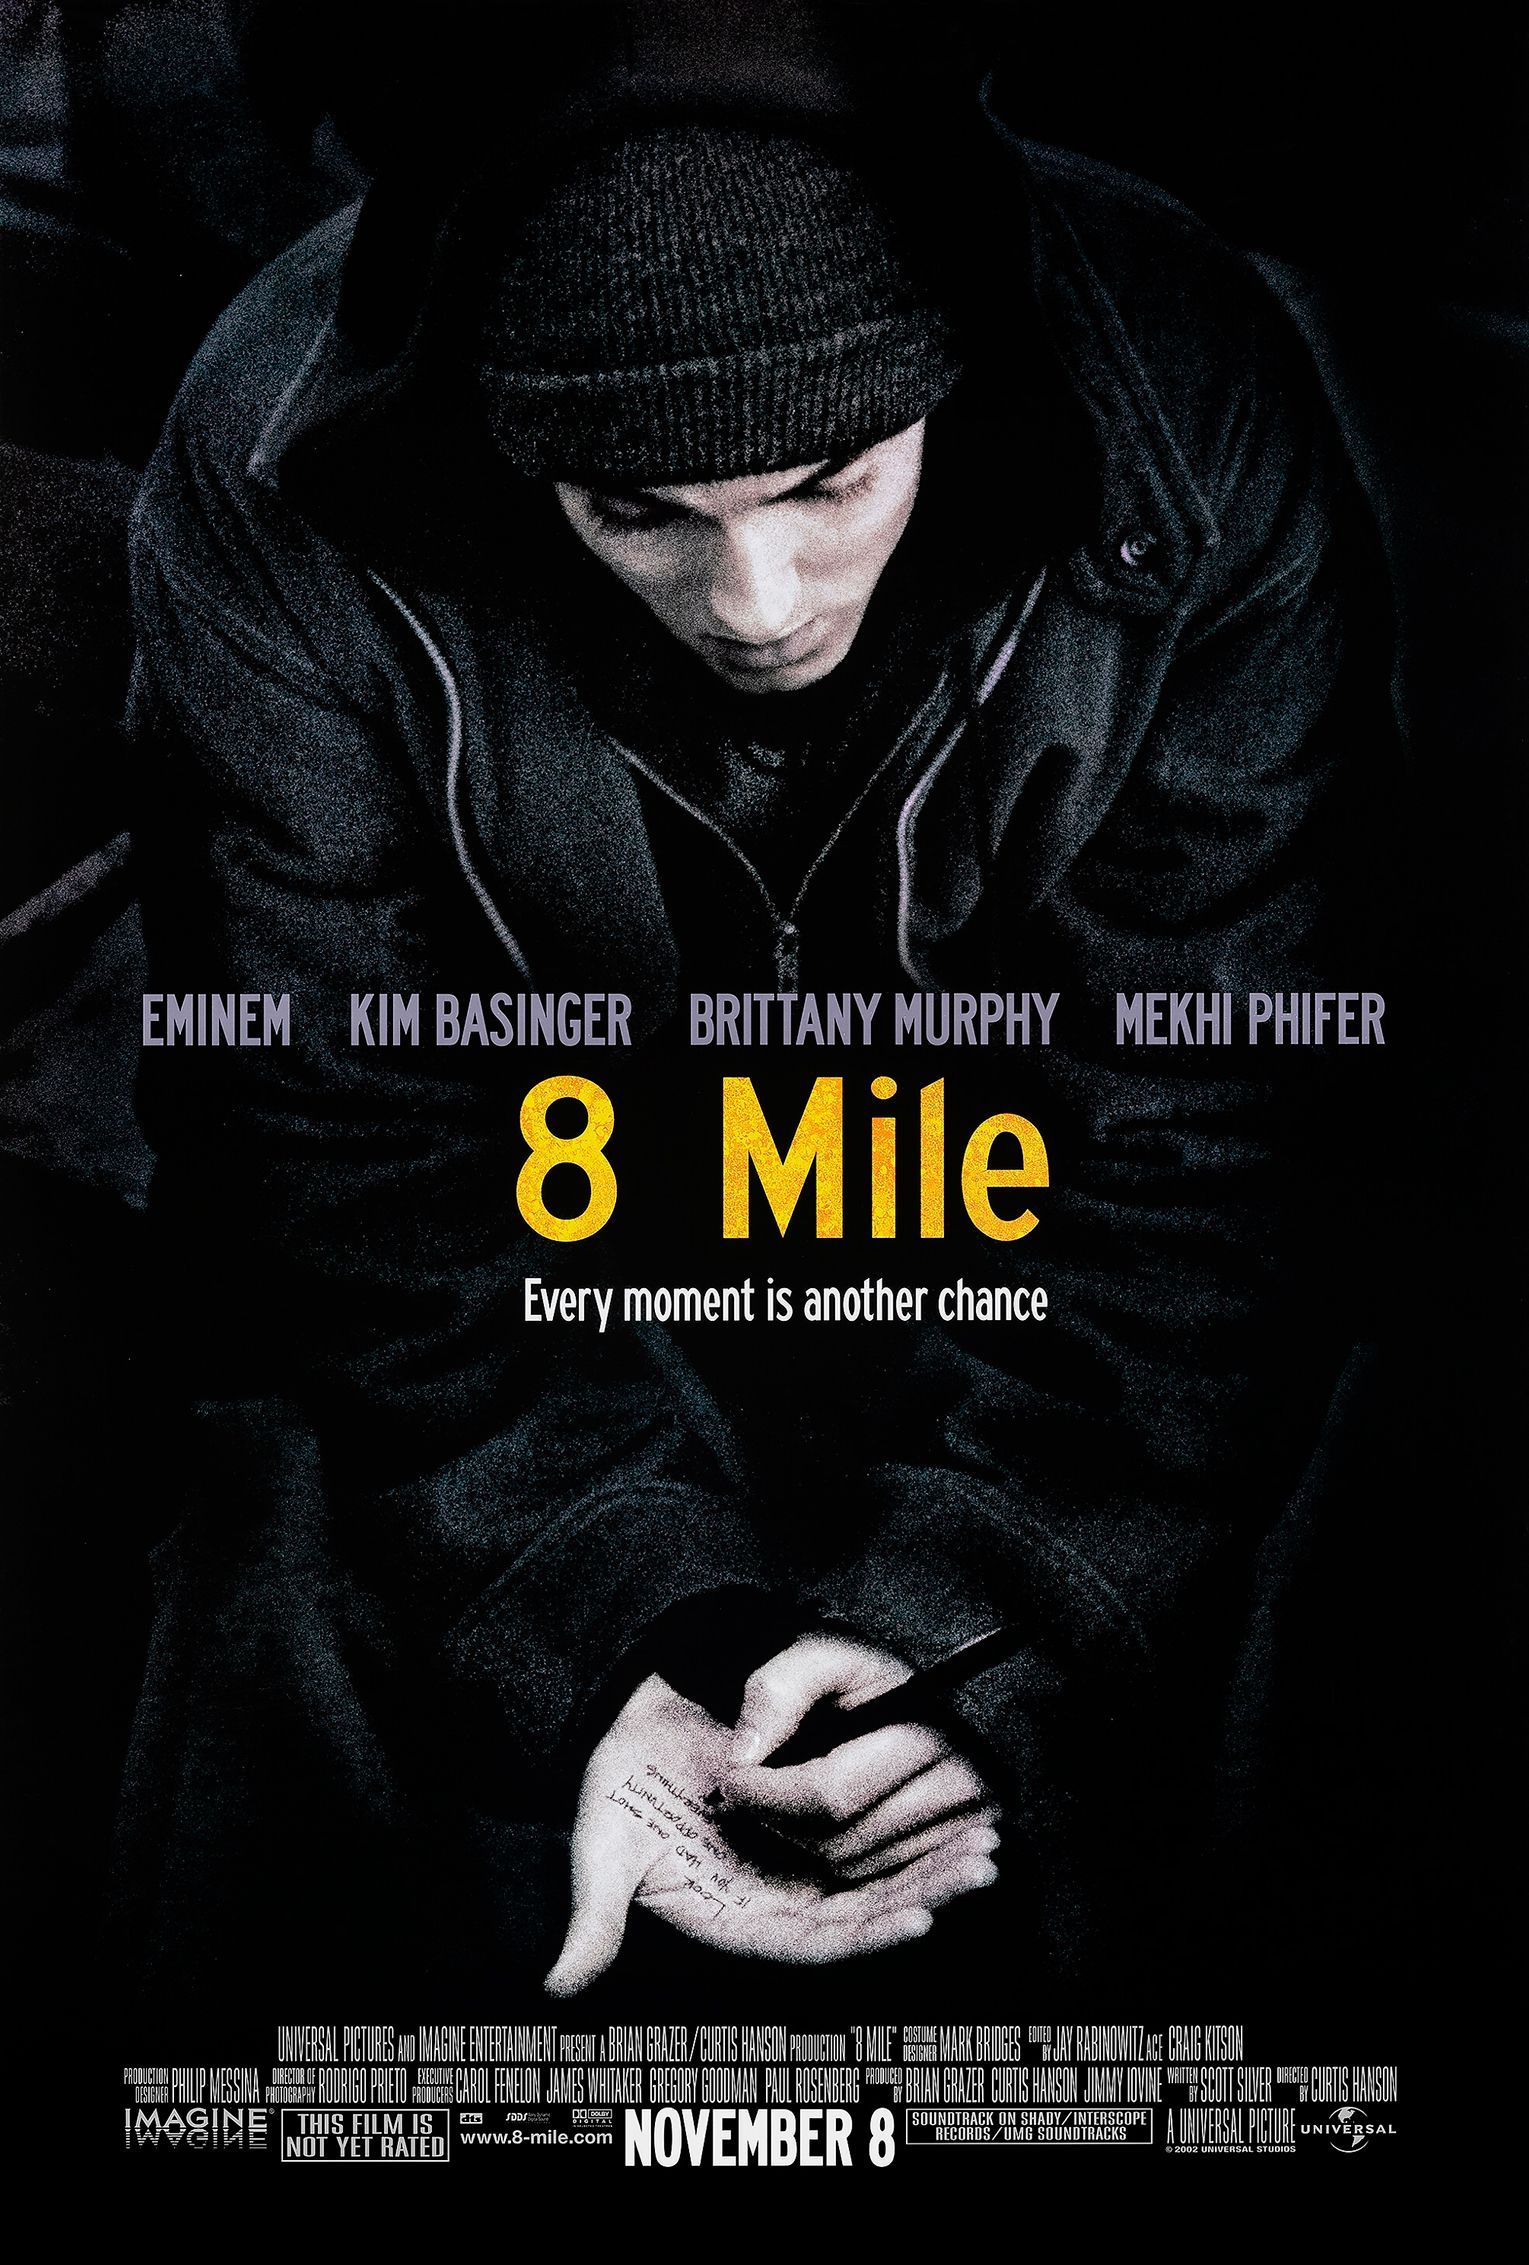 Actual Real Life: On Curtis Hanson’s “8 Mile”